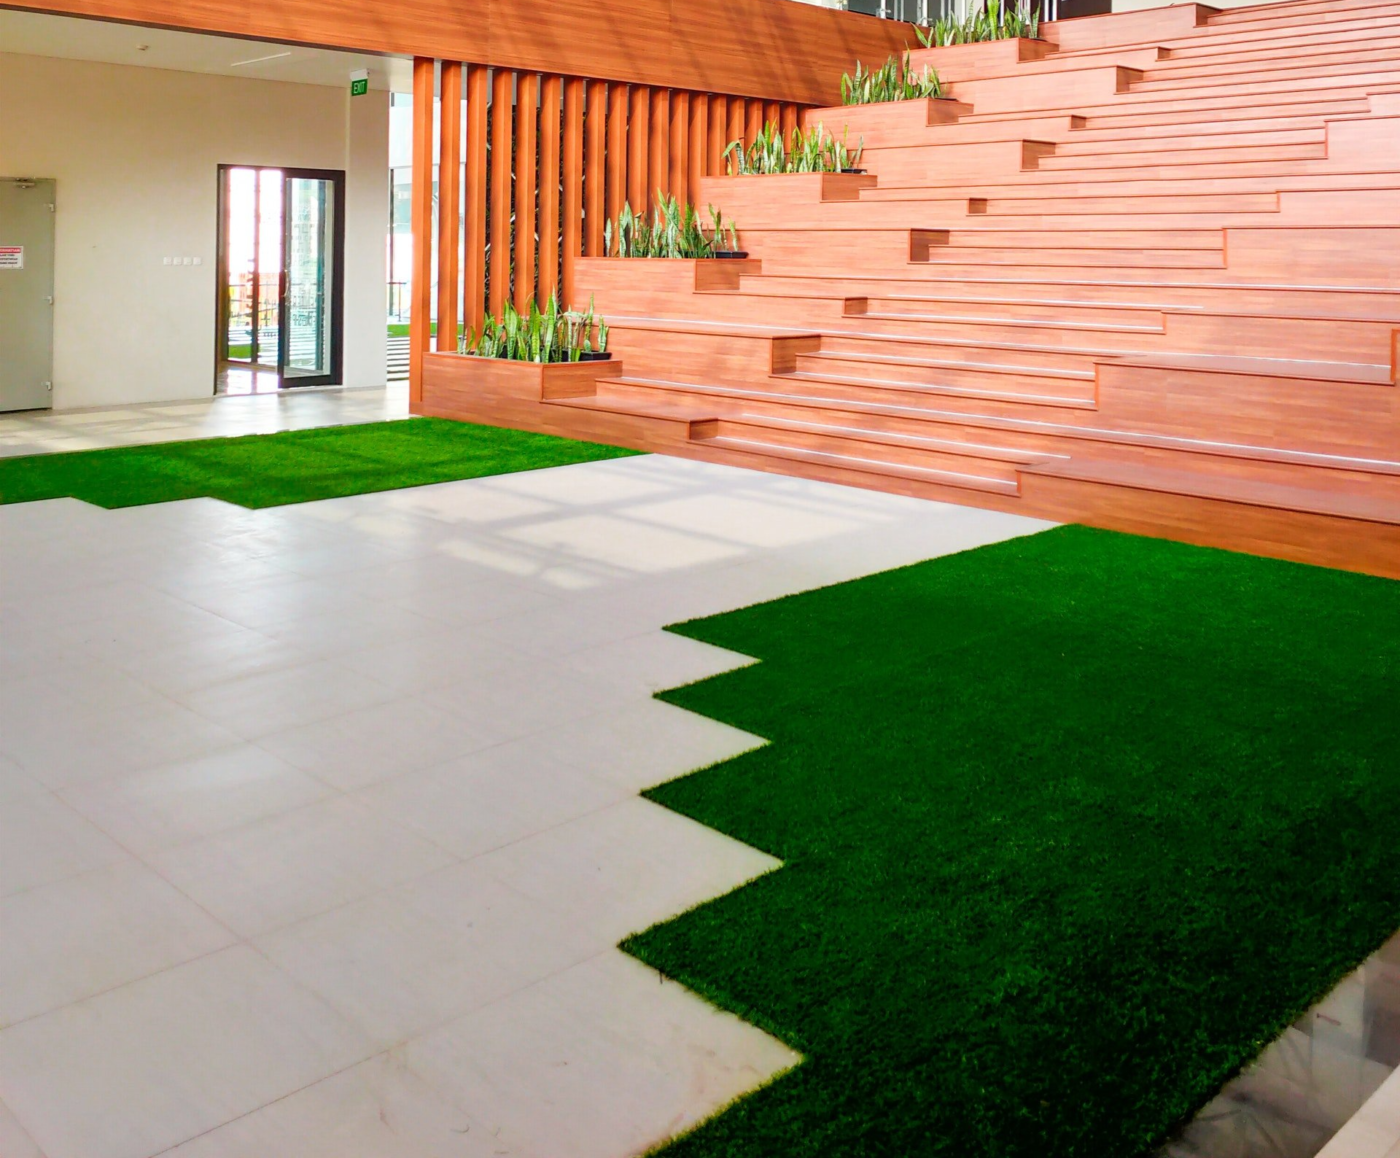 A modern indoor space featuring a stepped wooden seating area adorned with potted plants on the steps. A mix of white tile flooring and pet-friendly turf fills the foreground. Sunlight streams through windows, creating a bright and inviting atmosphere.